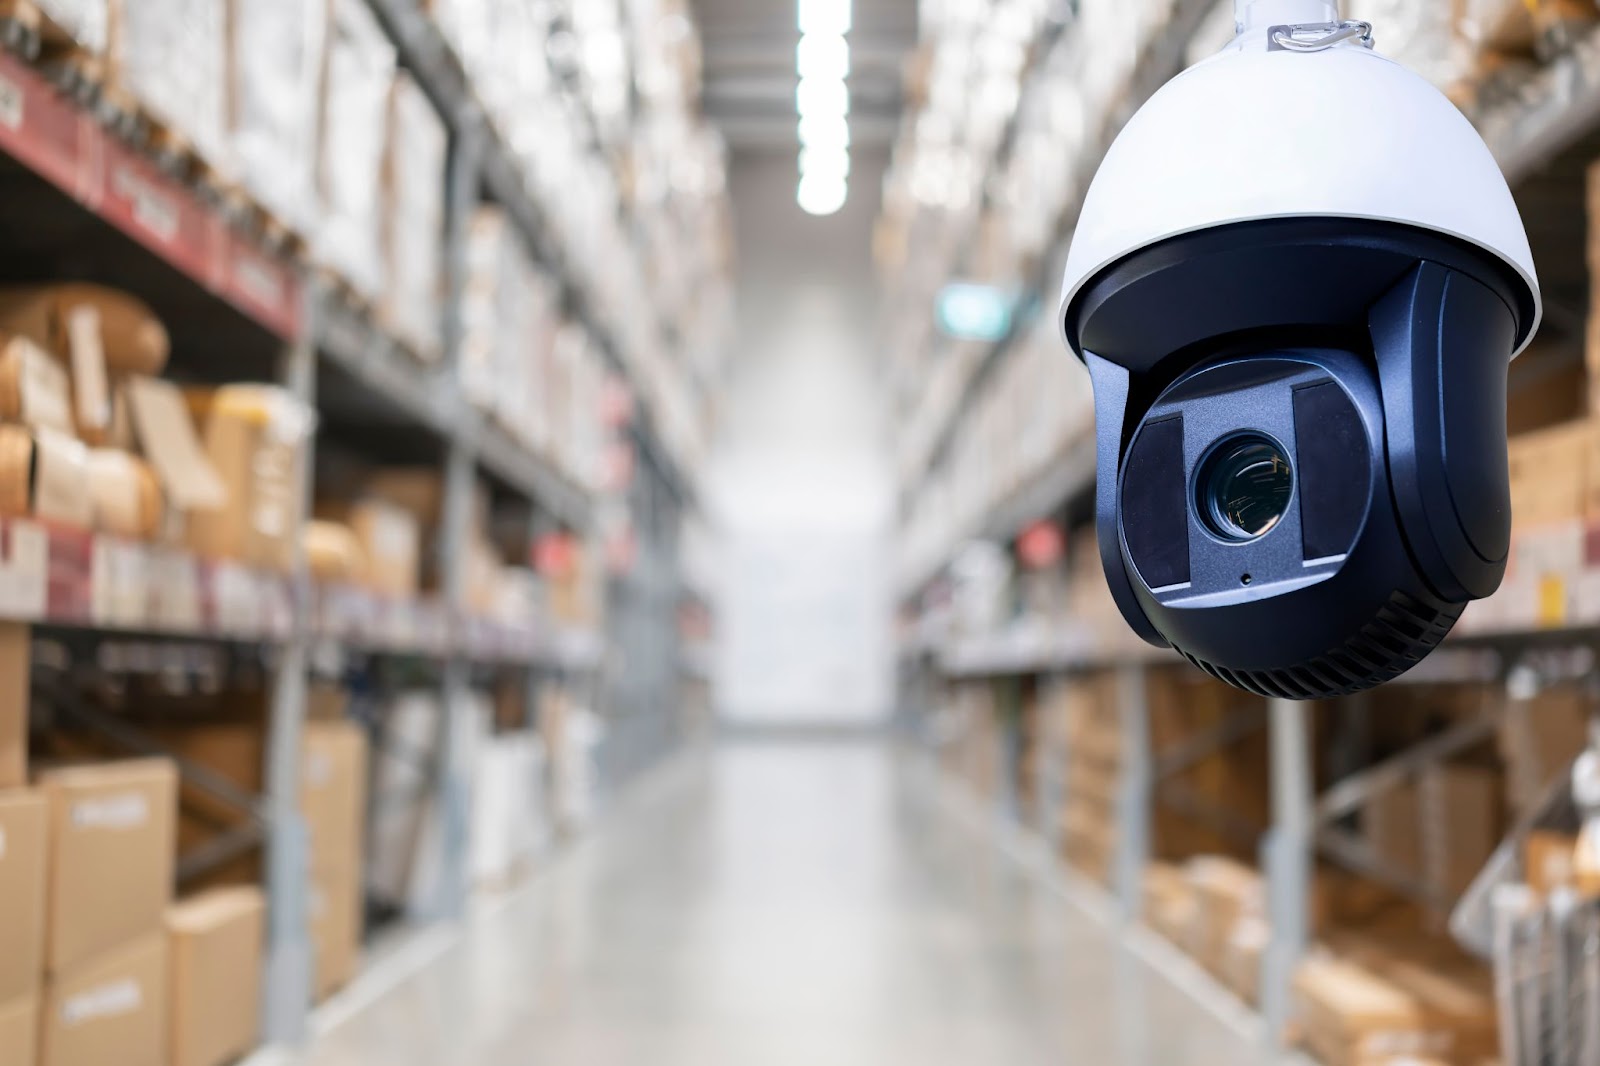 Close-up of a security camera with a blurred warehouse background.